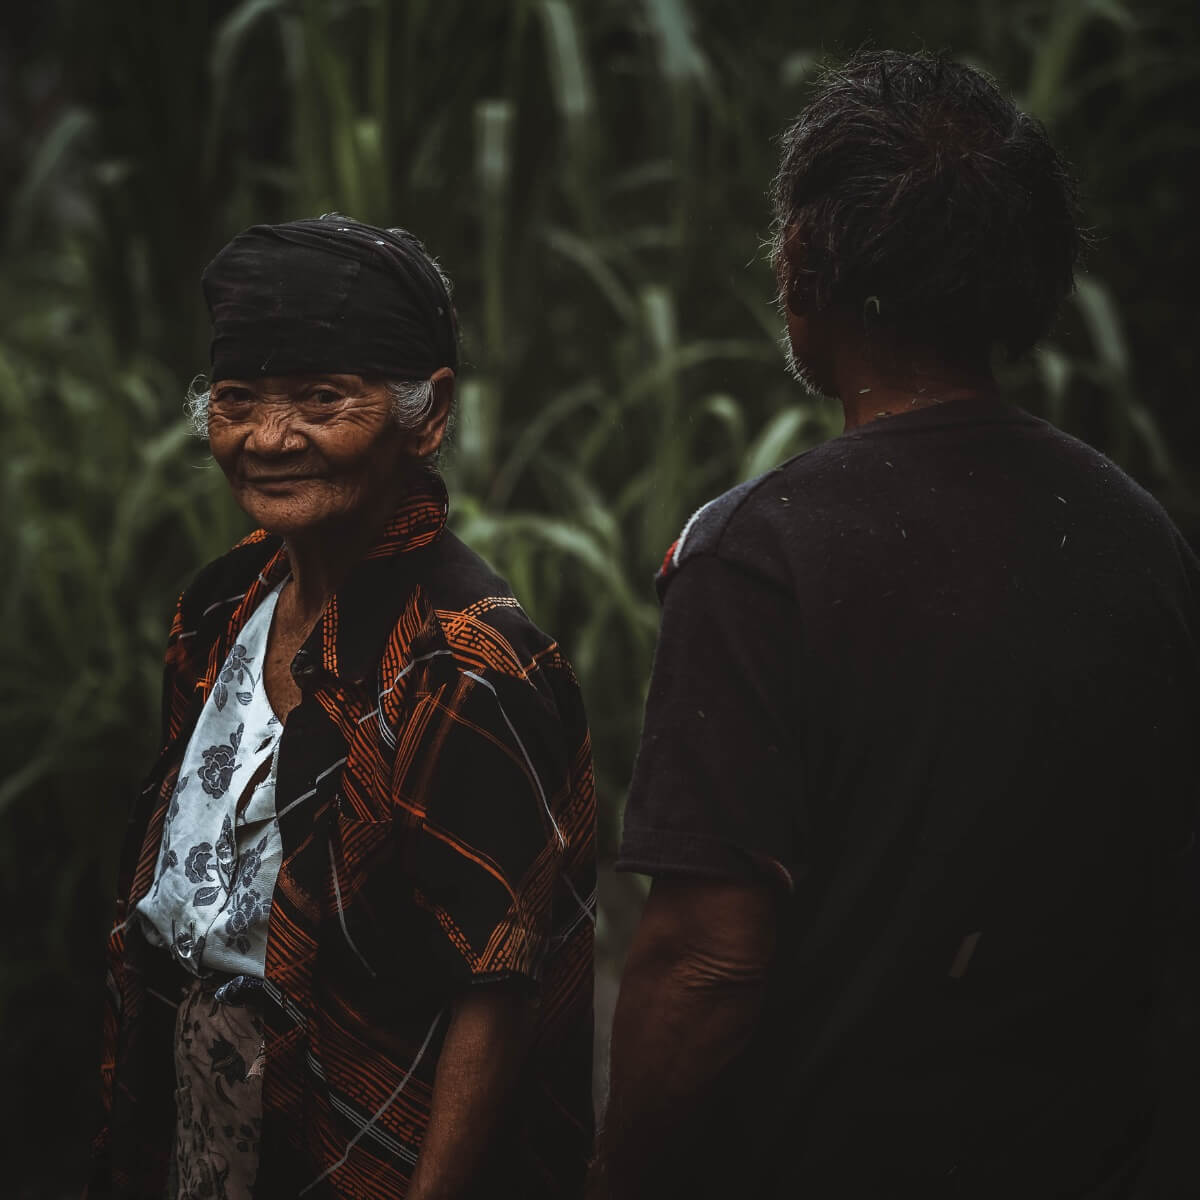 Old balinese woman and man in a ricefield